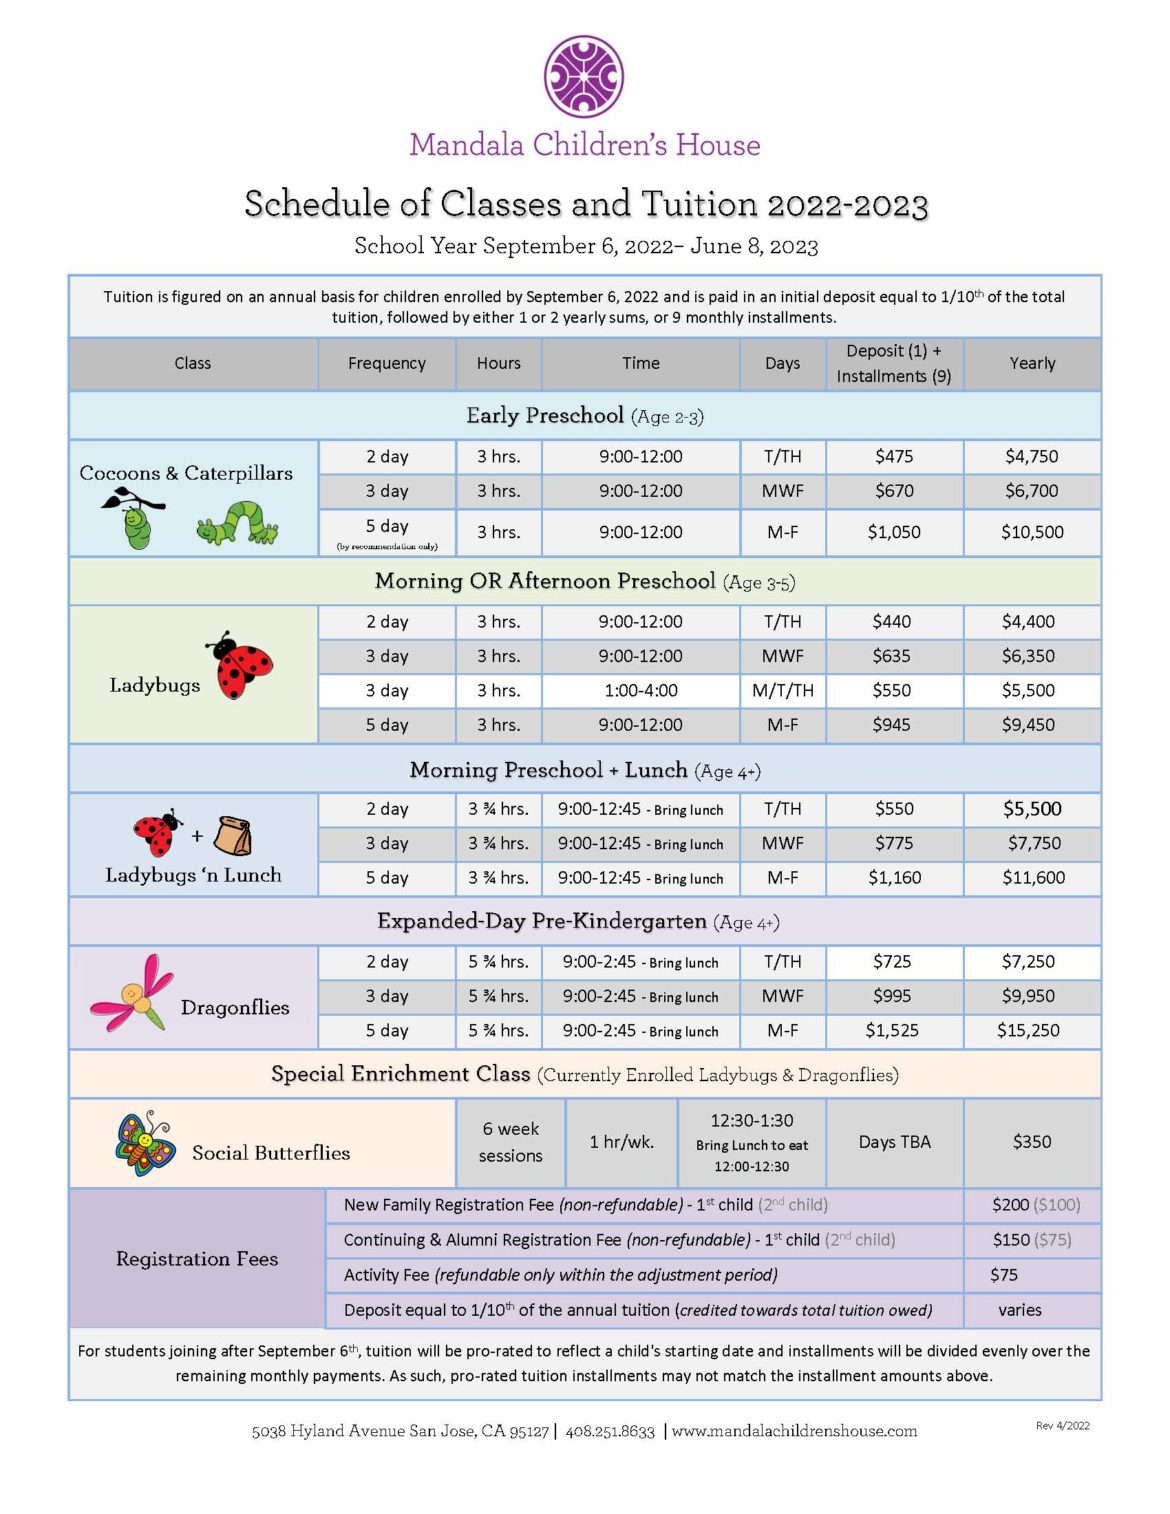 Schedule-of-Classes-Tuition-2022-23.jpg